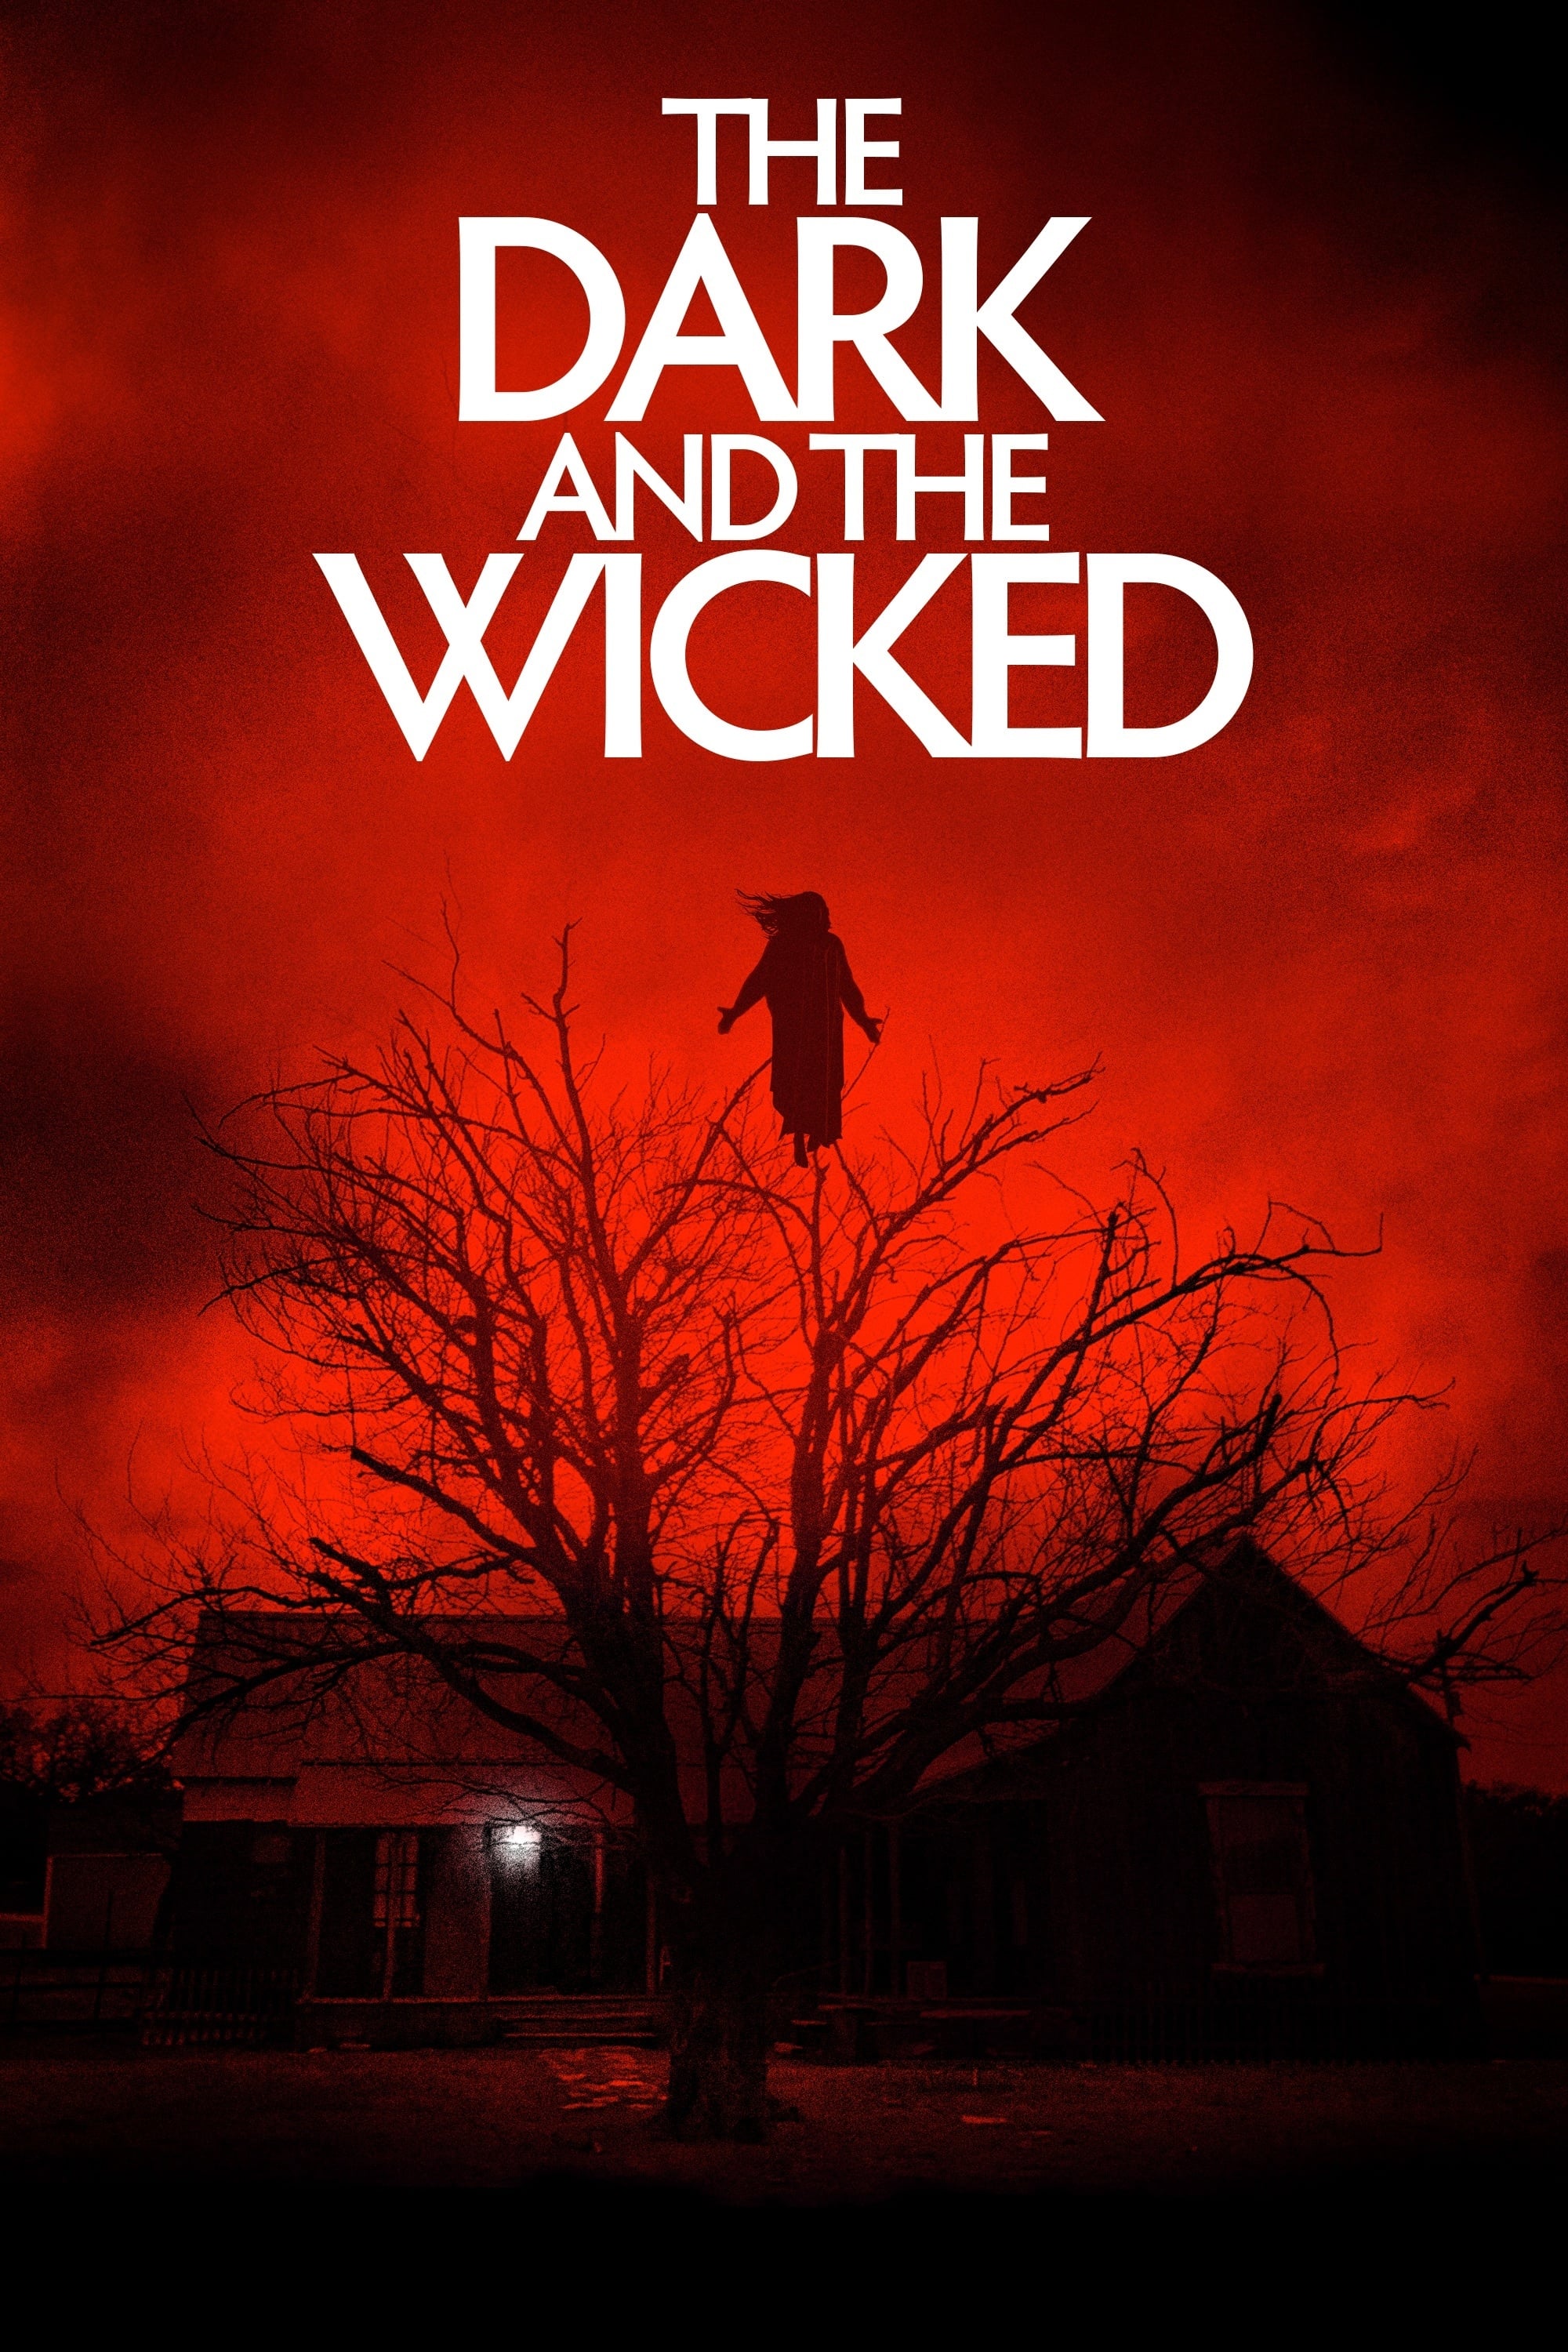 The Dark and the Wicked film